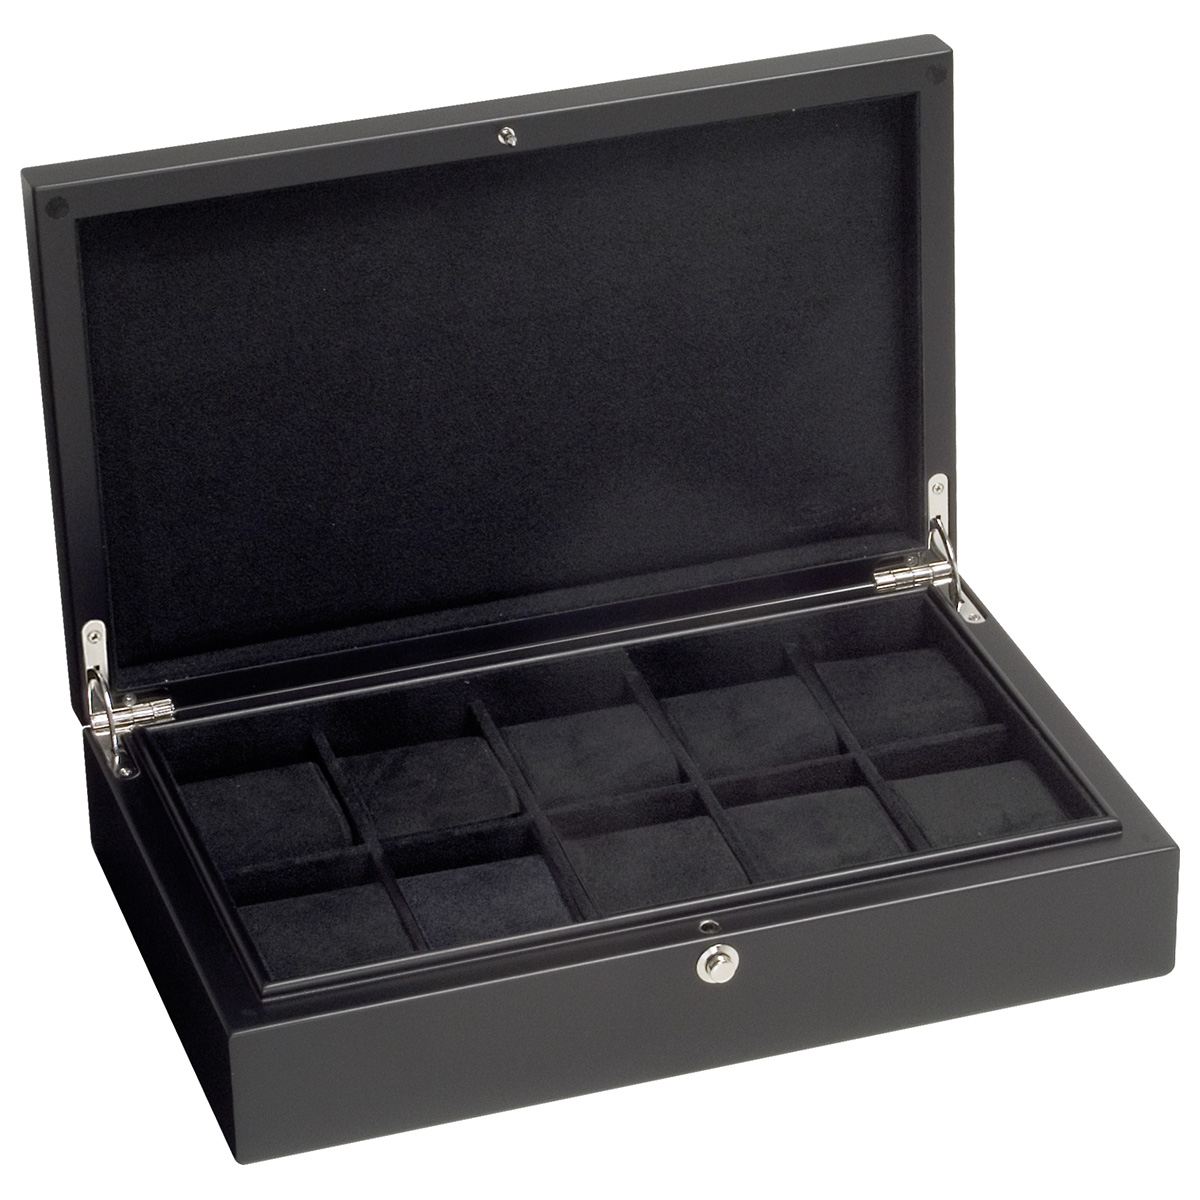 Beco Castle watch collector's box for 10 watches, matt black, black lining